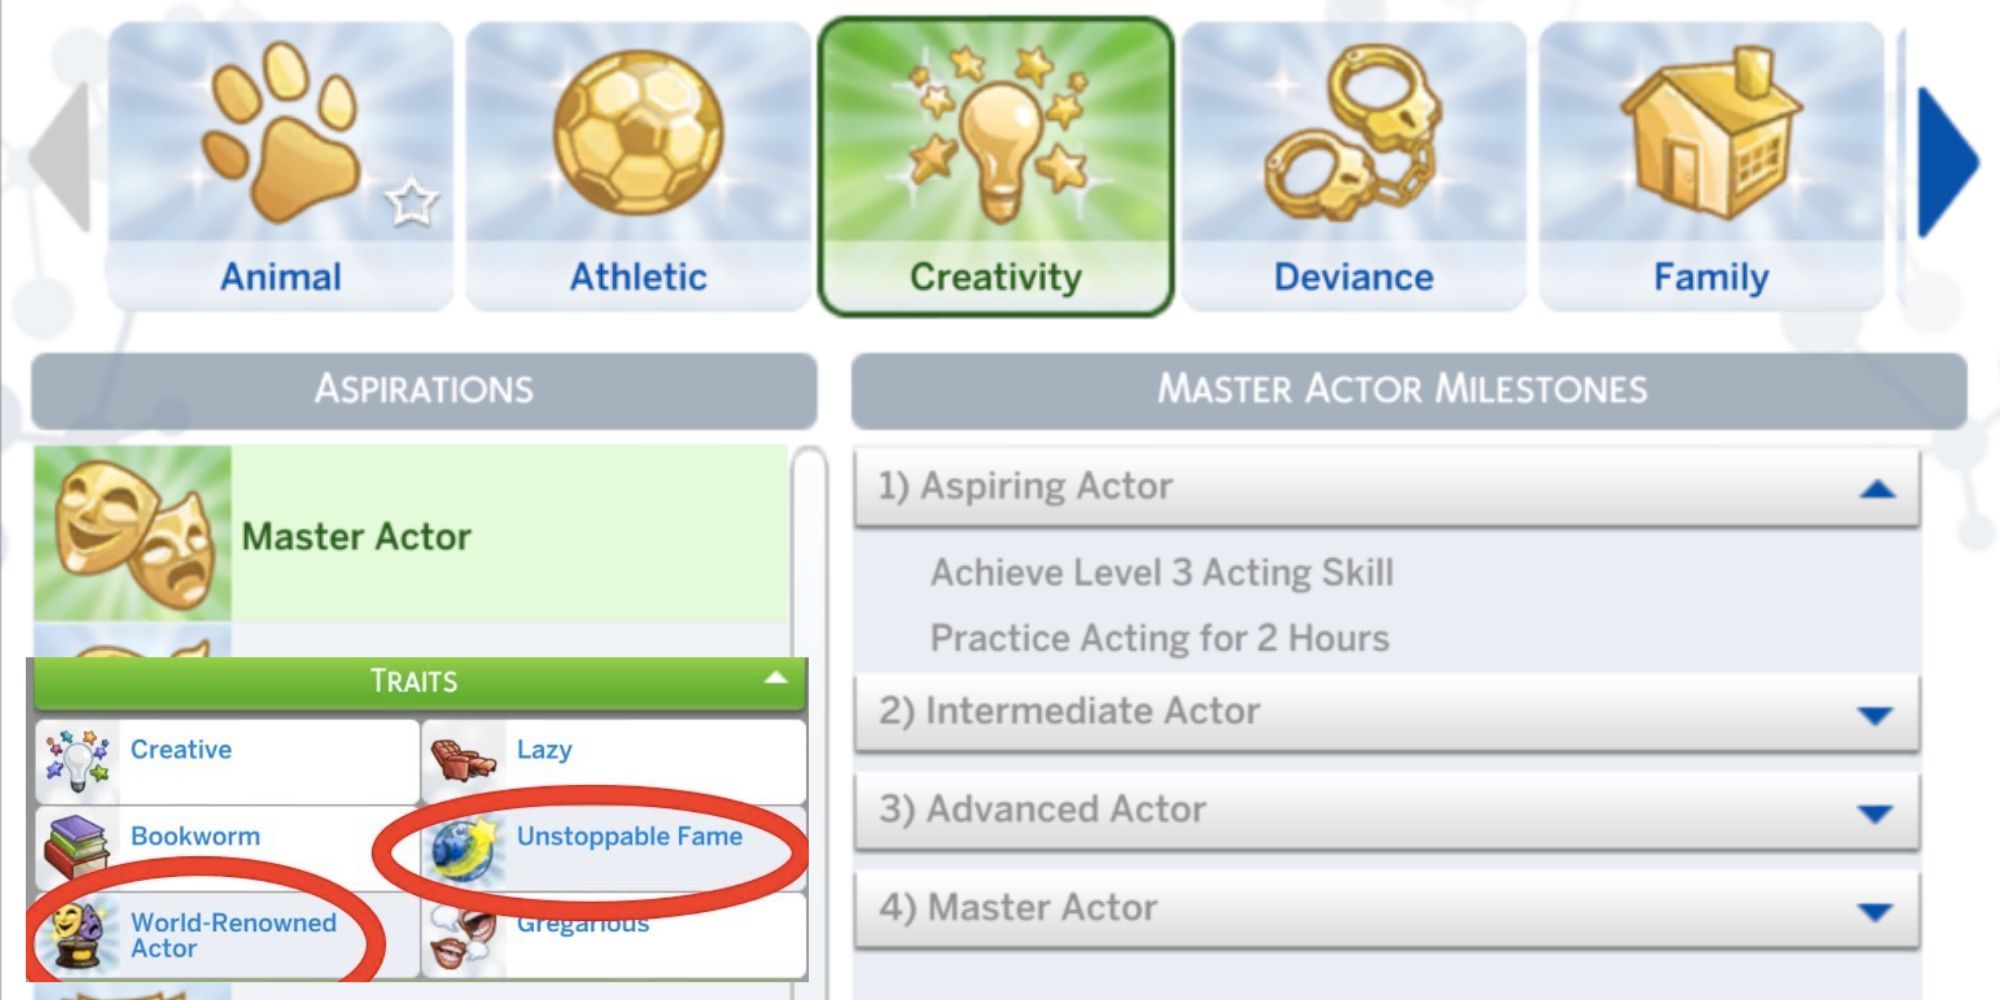 The Sims 4 Master Actor Aspiration